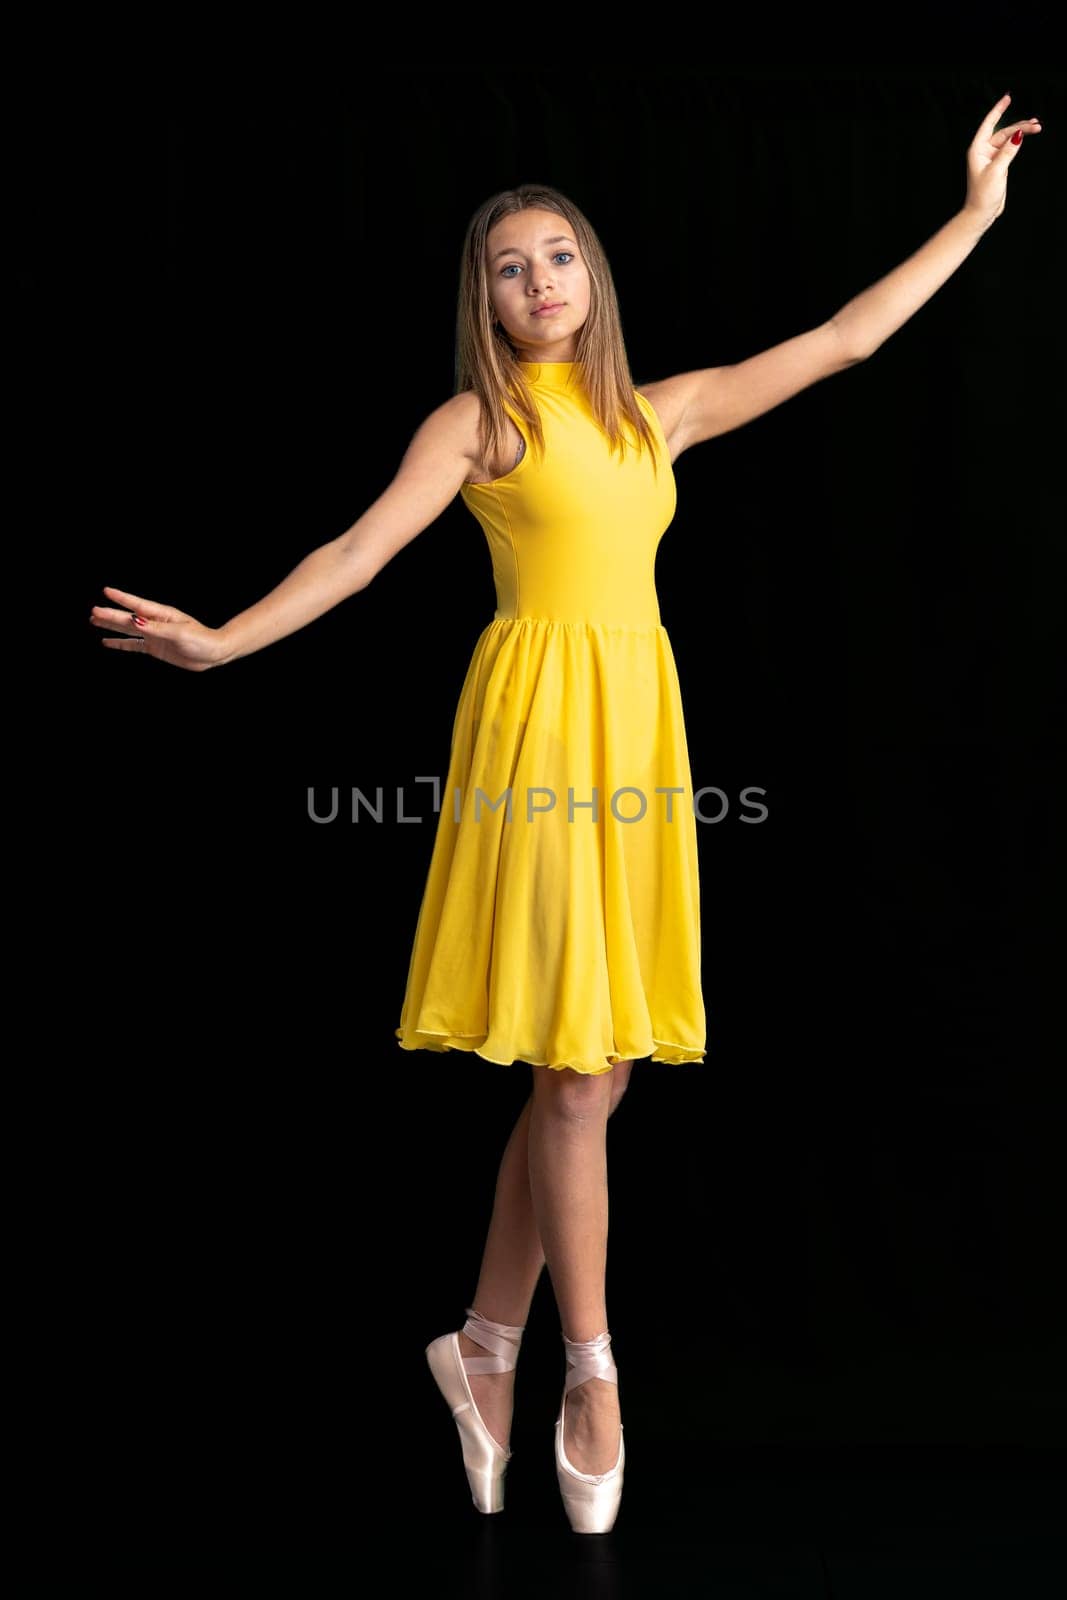 portrait of a teenage ballerina in a suit on a black background by Edophoto